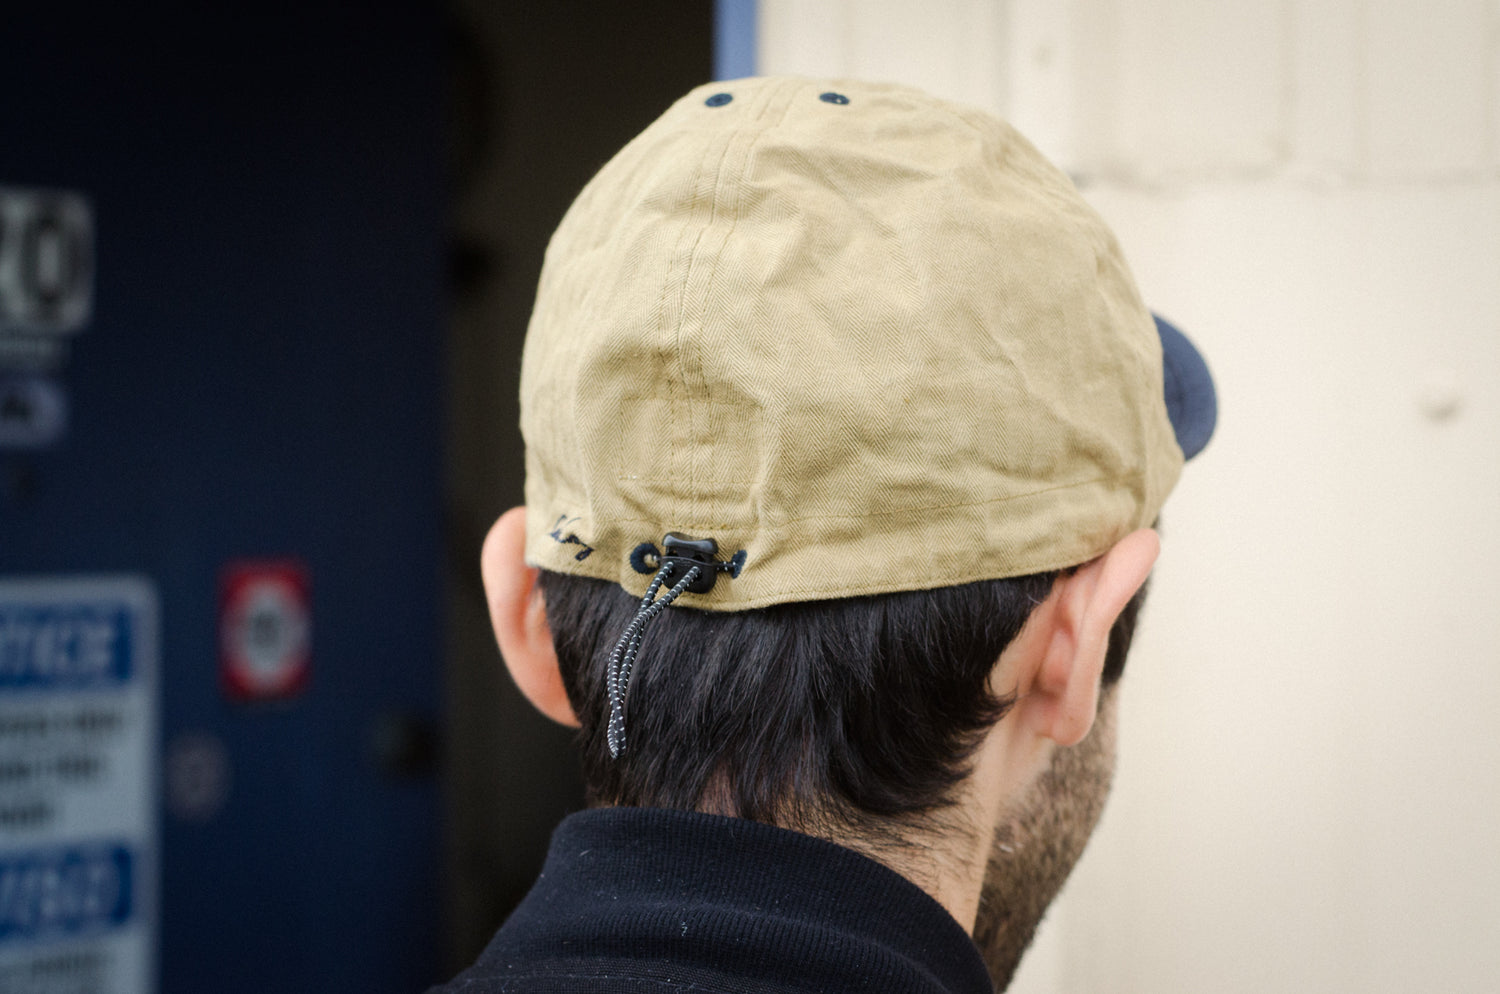 Blue Lug/RBW hats Works Rivendell – Bicycle